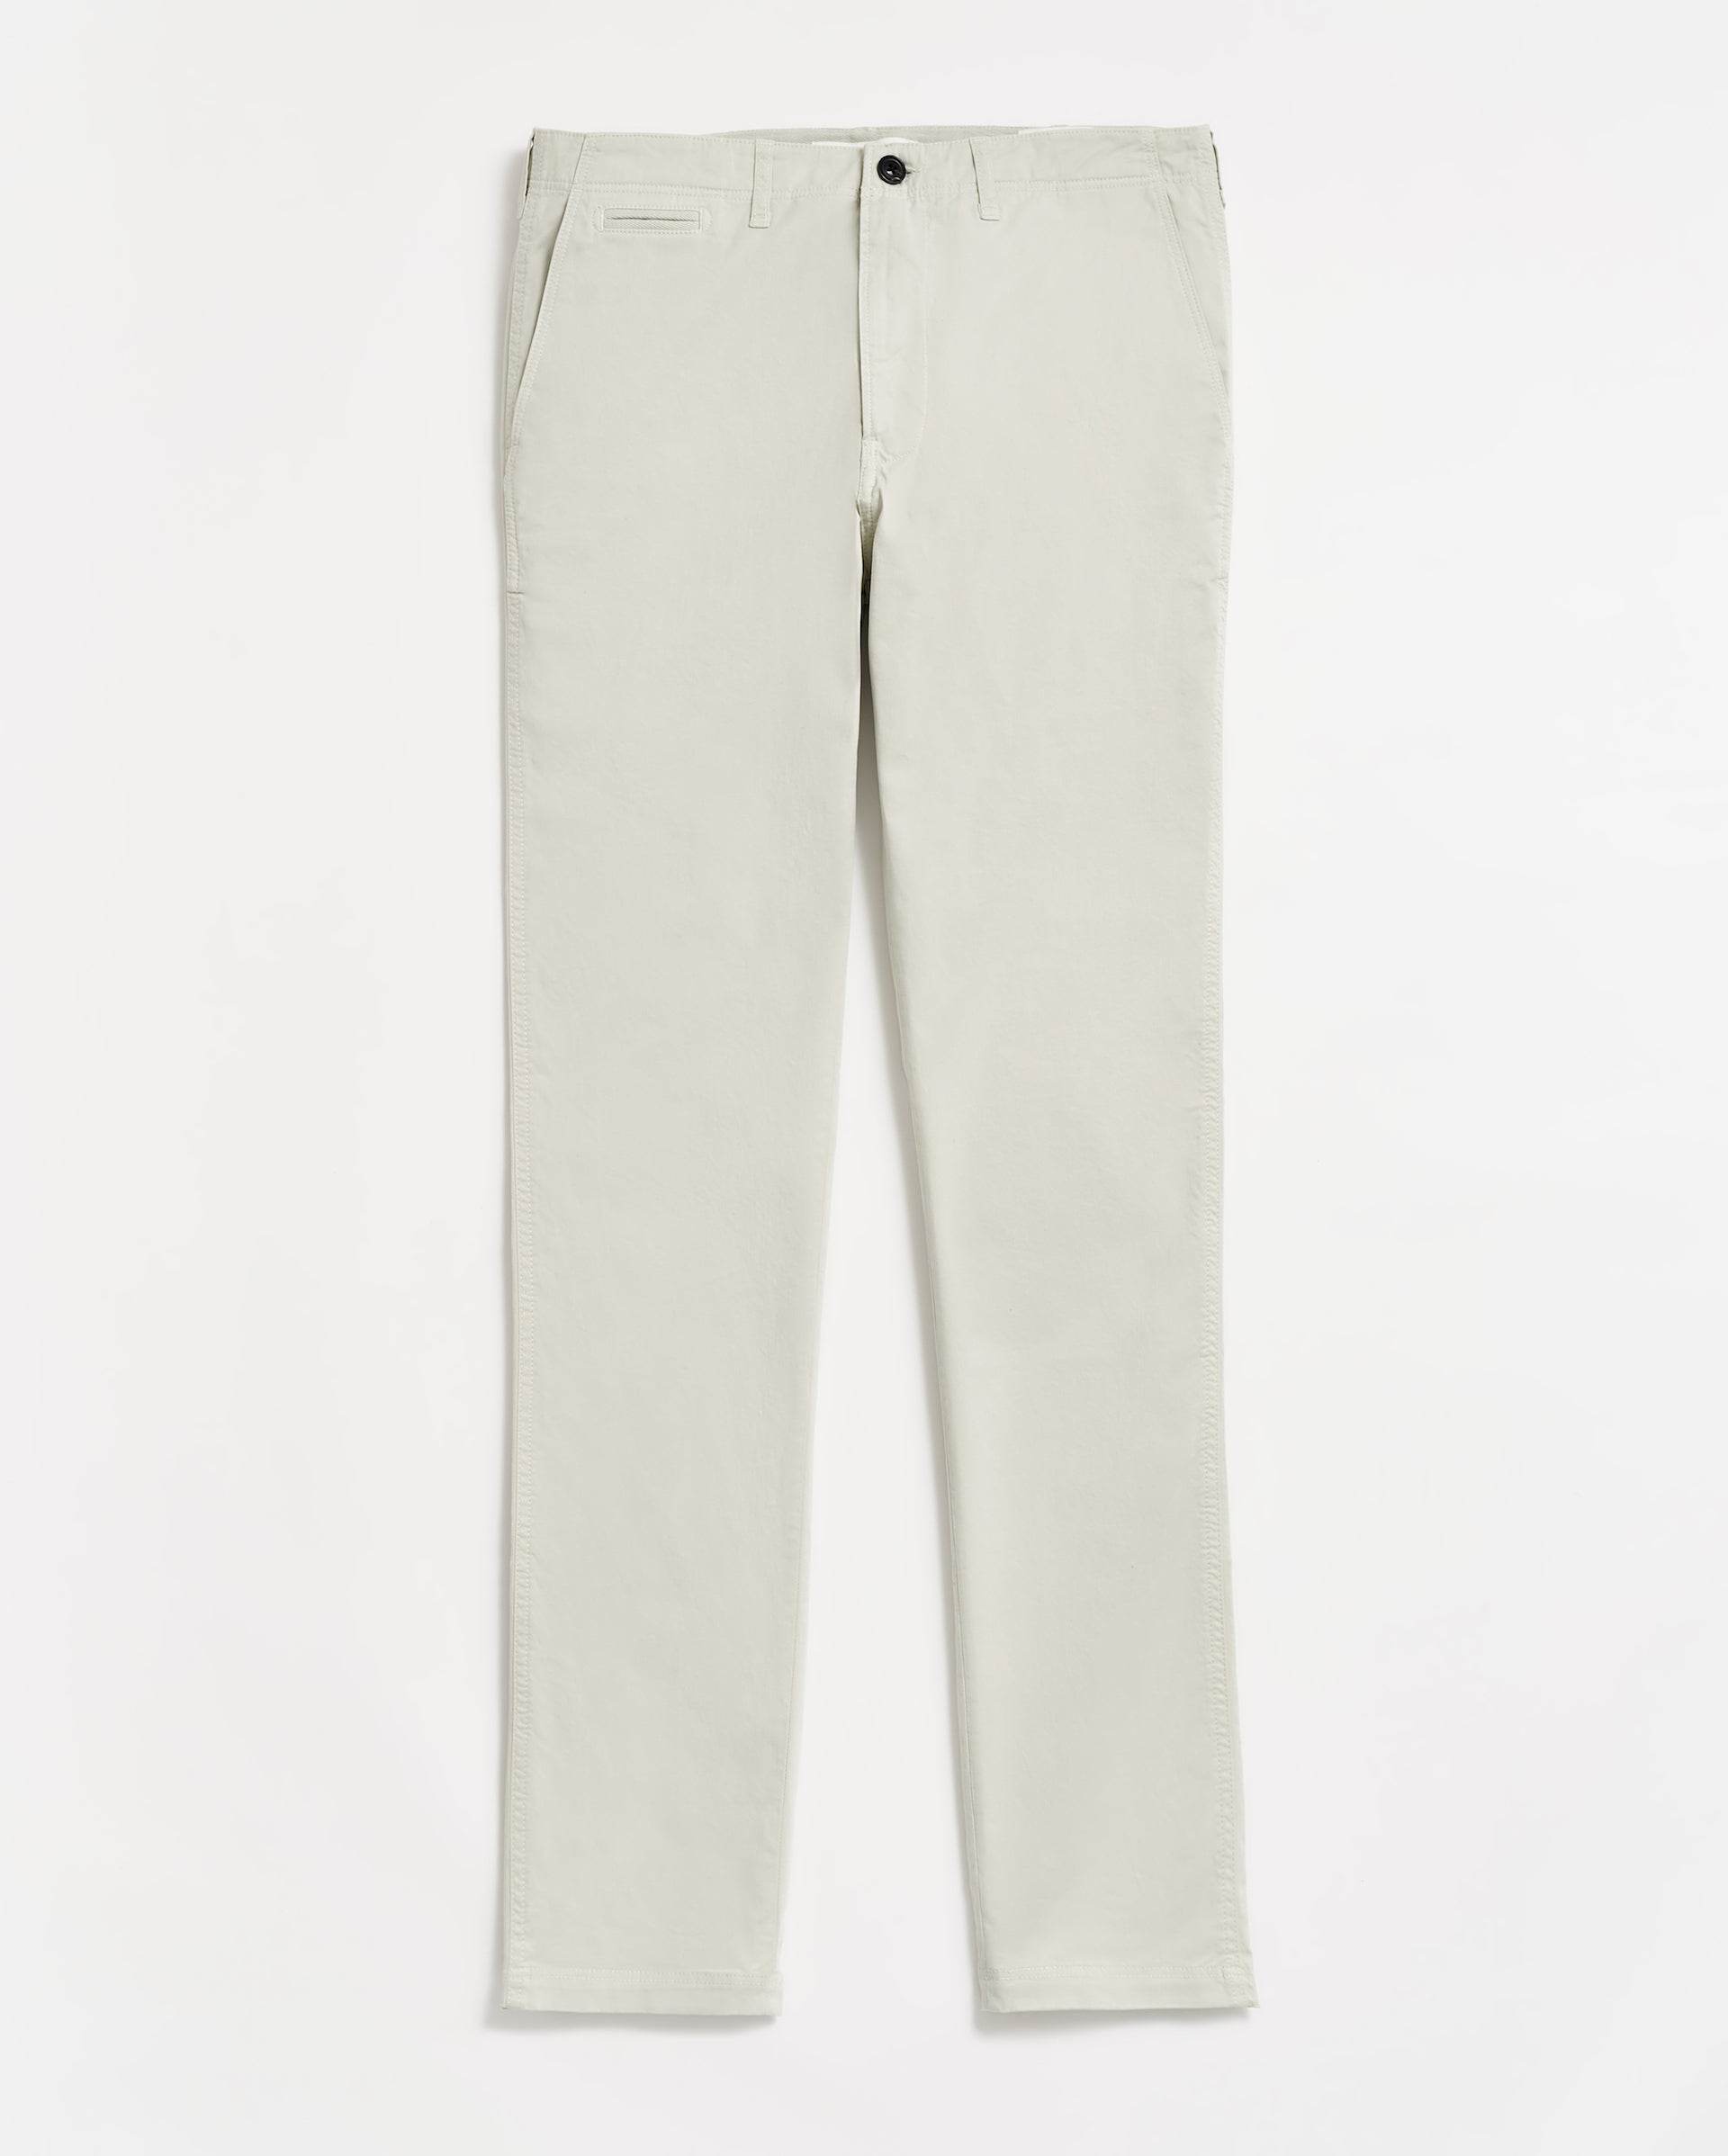 Designer Boys Trousers  Buy Trousers and Chino Pants for Boys Online  The  Collective